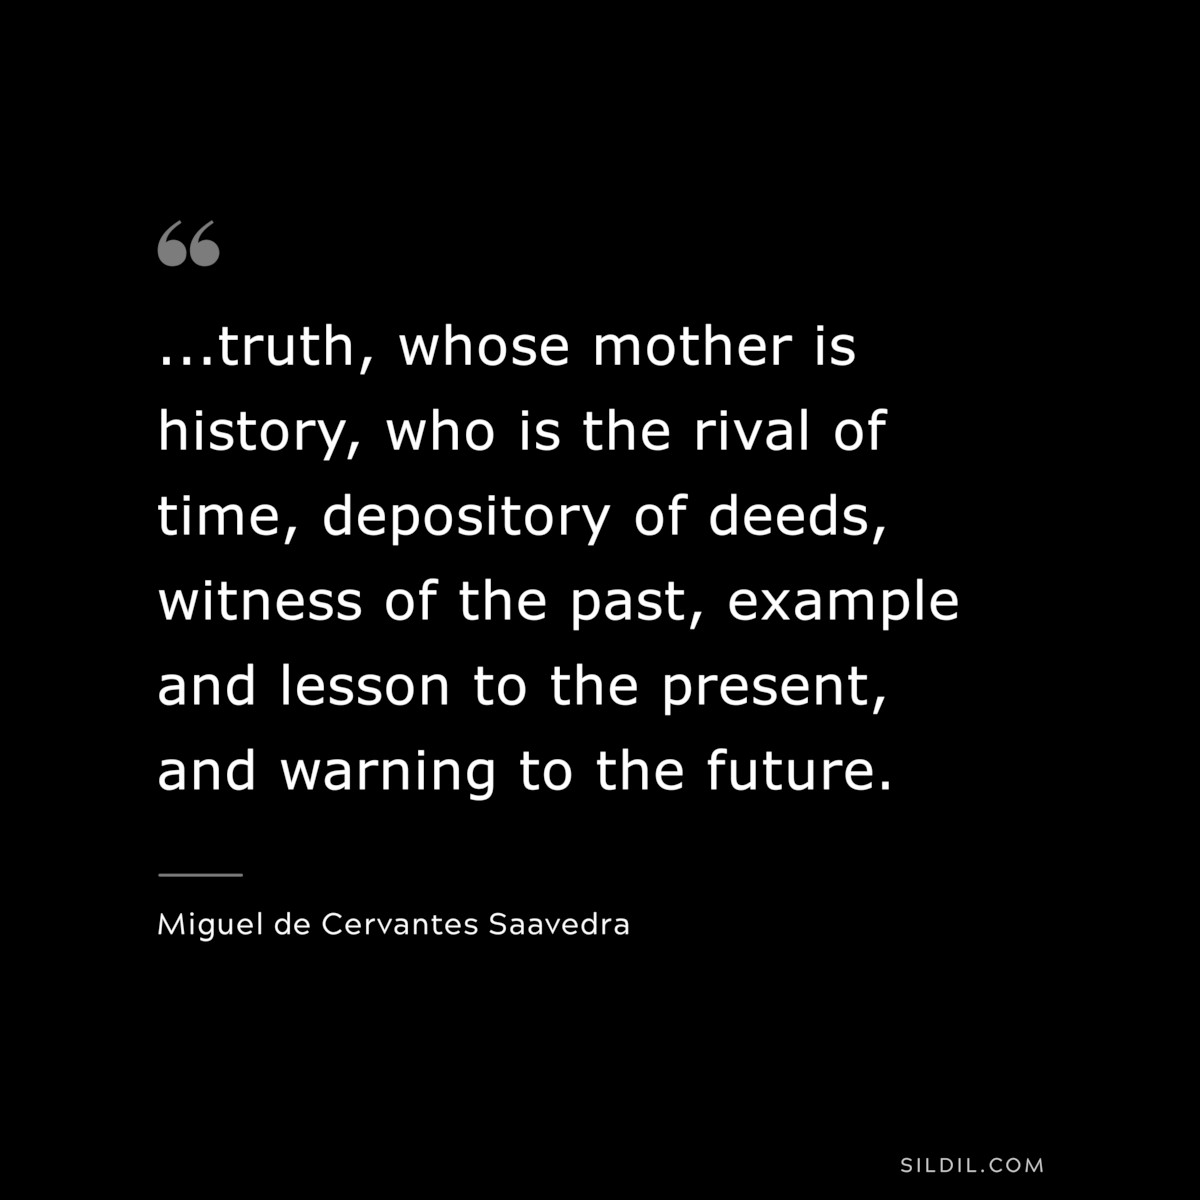 ...truth, whose mother is history, who is the rival of time, depository of deeds, witness of the past, example and lesson to the present, and warning to the future. ― Miguel de Cervantes Saavedra